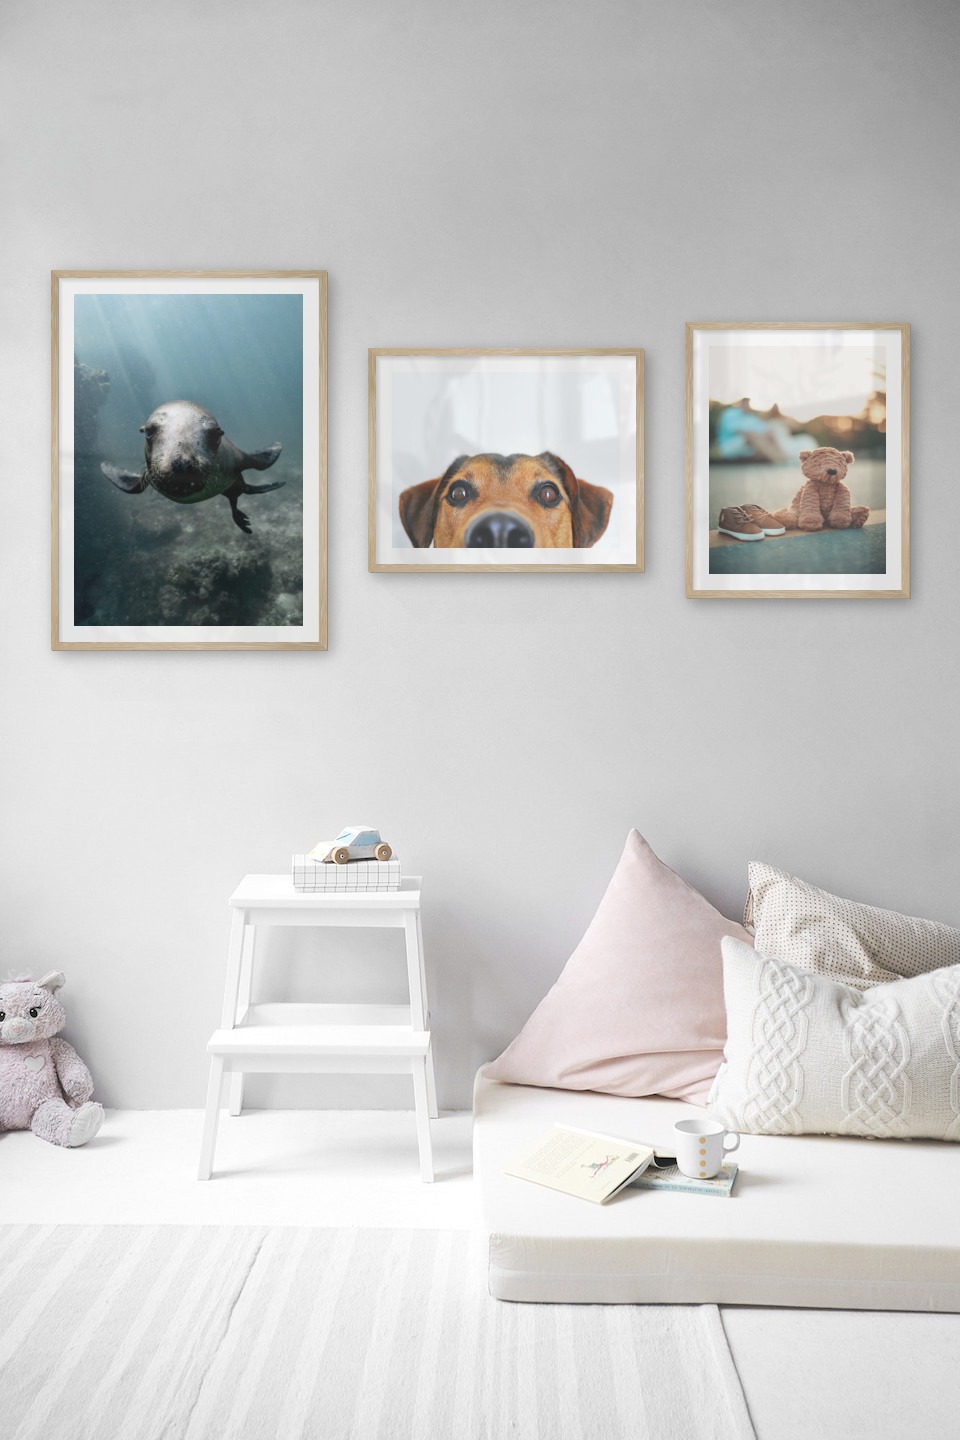 Gallery wall with picture frames in wood in sizes 50x70 and 40x50 with prints "Seal in the water", "Hundnos" and "Teddy bear on the street"